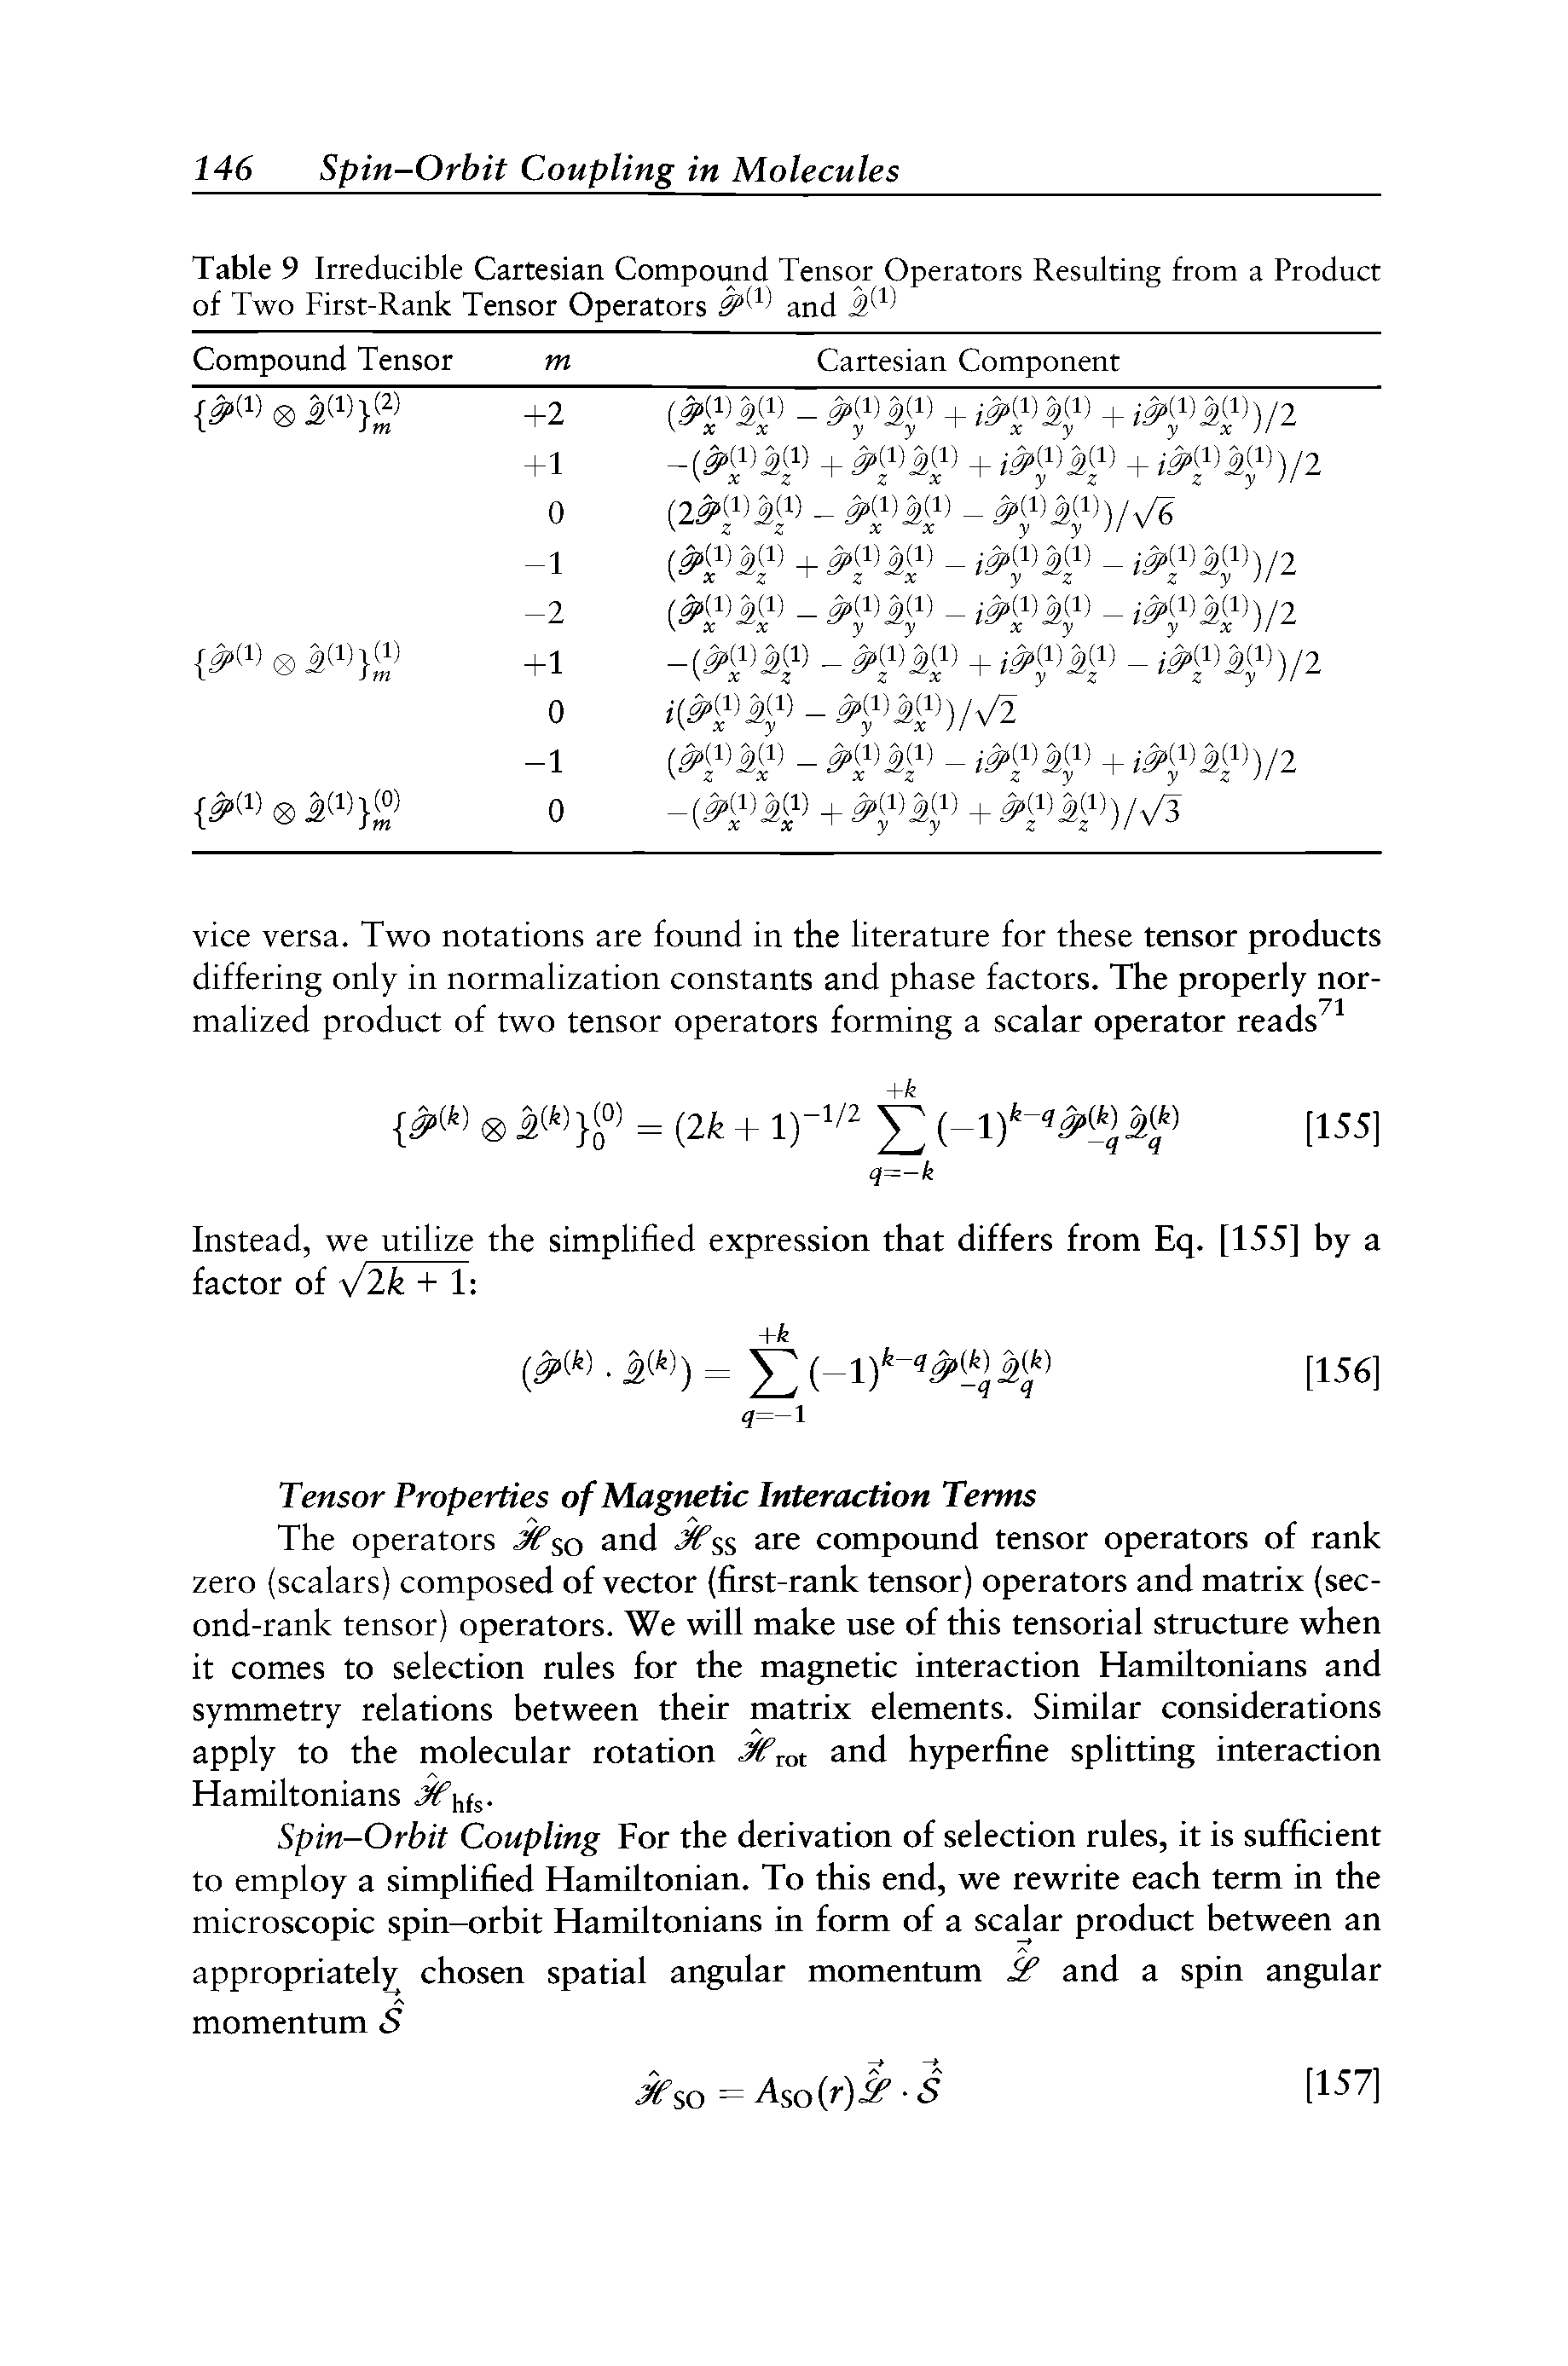 Table 9 Irreducible Cartesian Compound Tensor Operators Resulting from a Product of Two First-Rank Tensor Operators 3 and jT ...